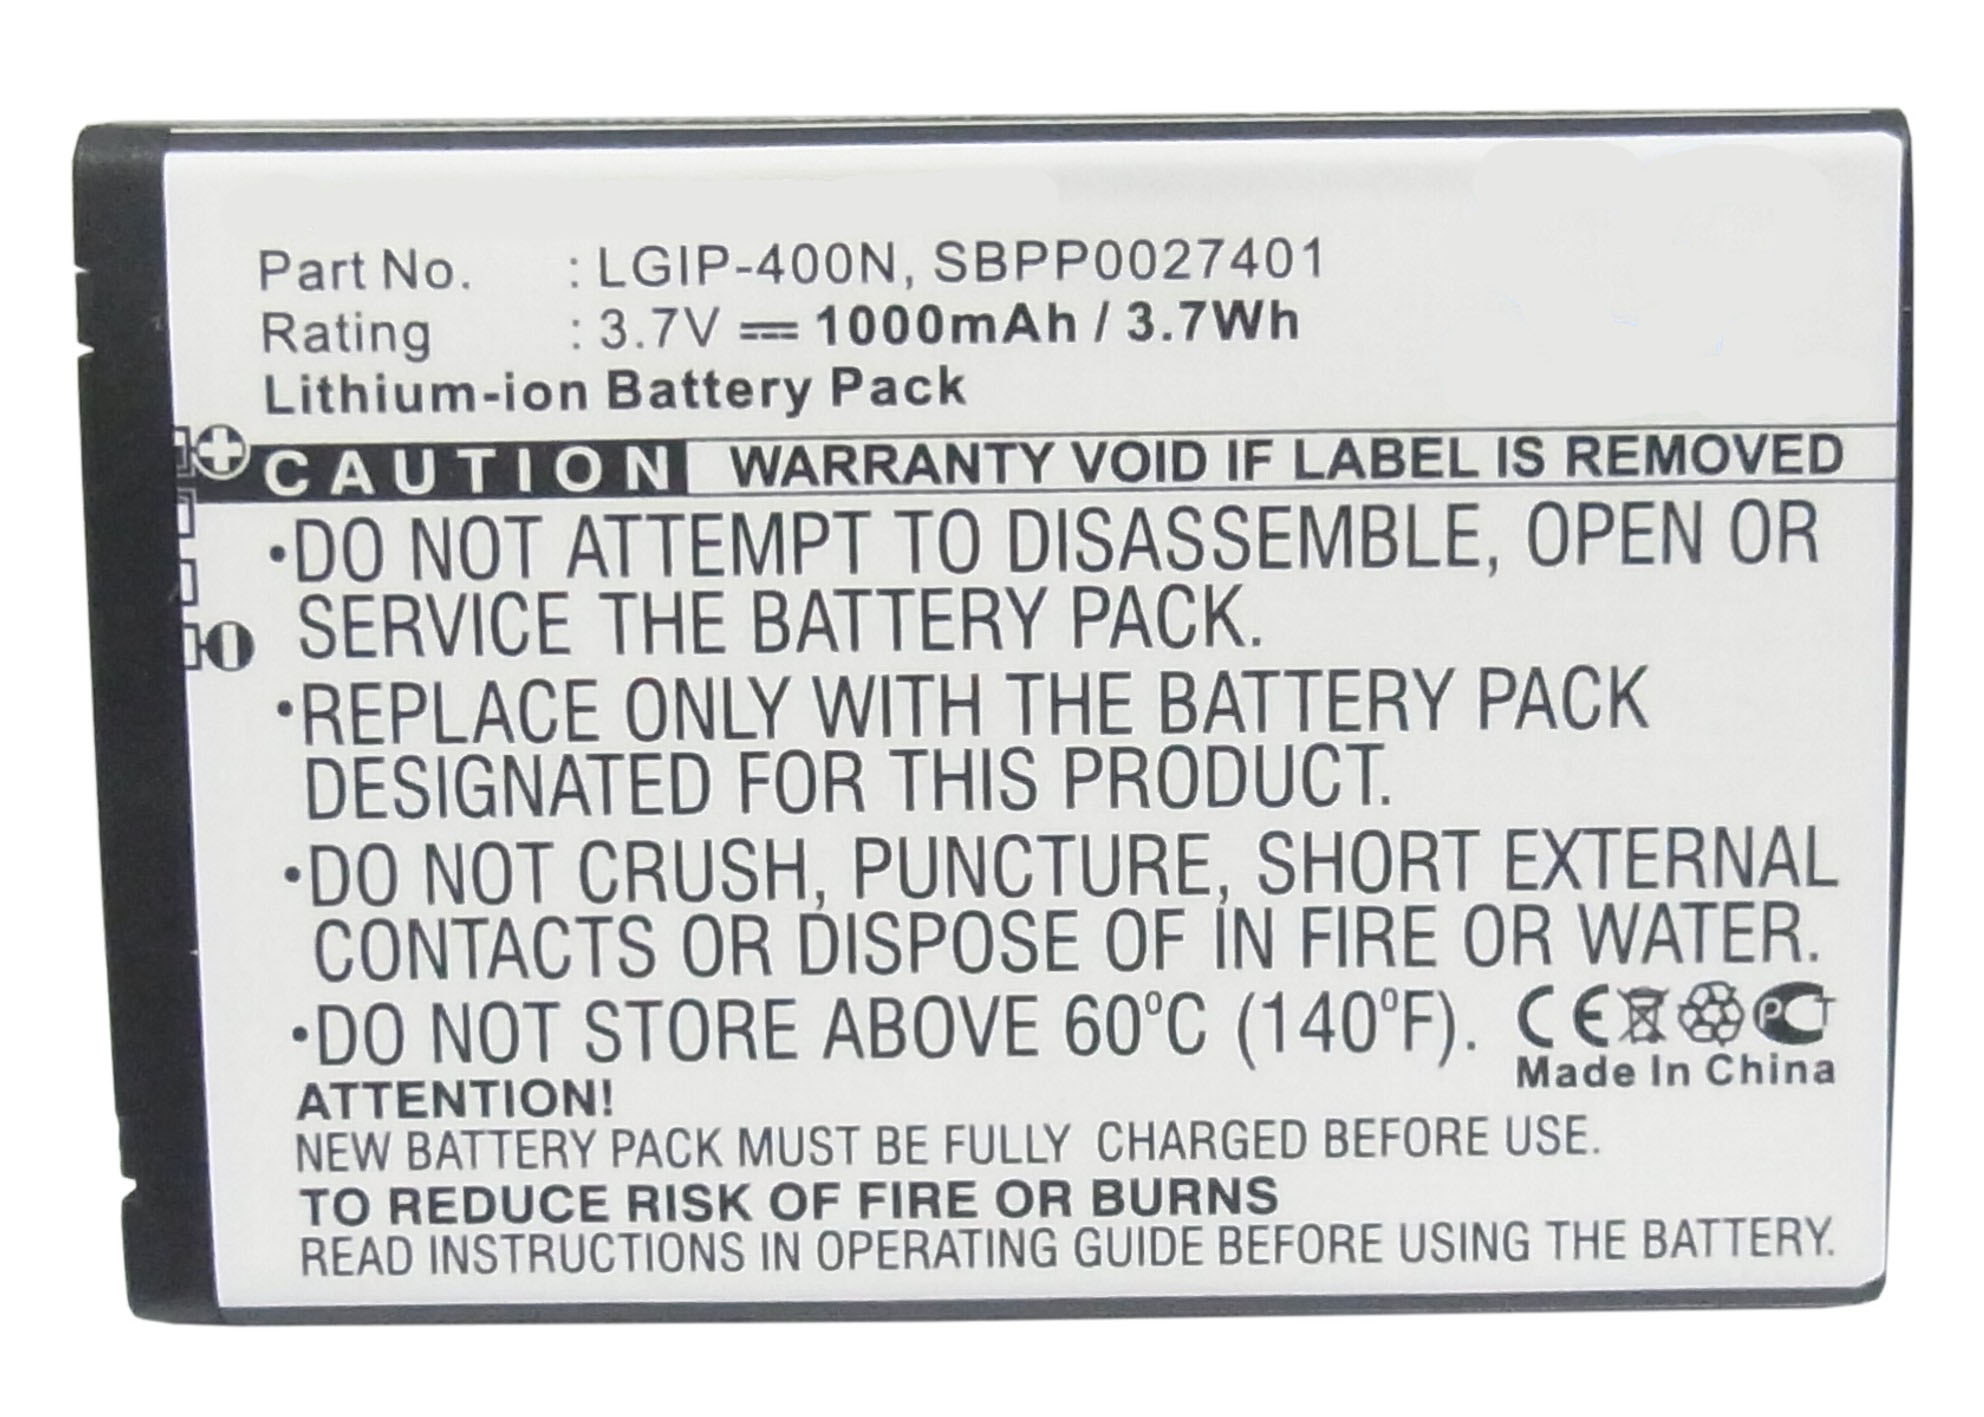 Synergy Digital Cell Phone Battery, Compatiable with LG LGIP-400N, SBPP0027401 Cell Phone Battery (3.7V, Li-ion, 1000mAh)